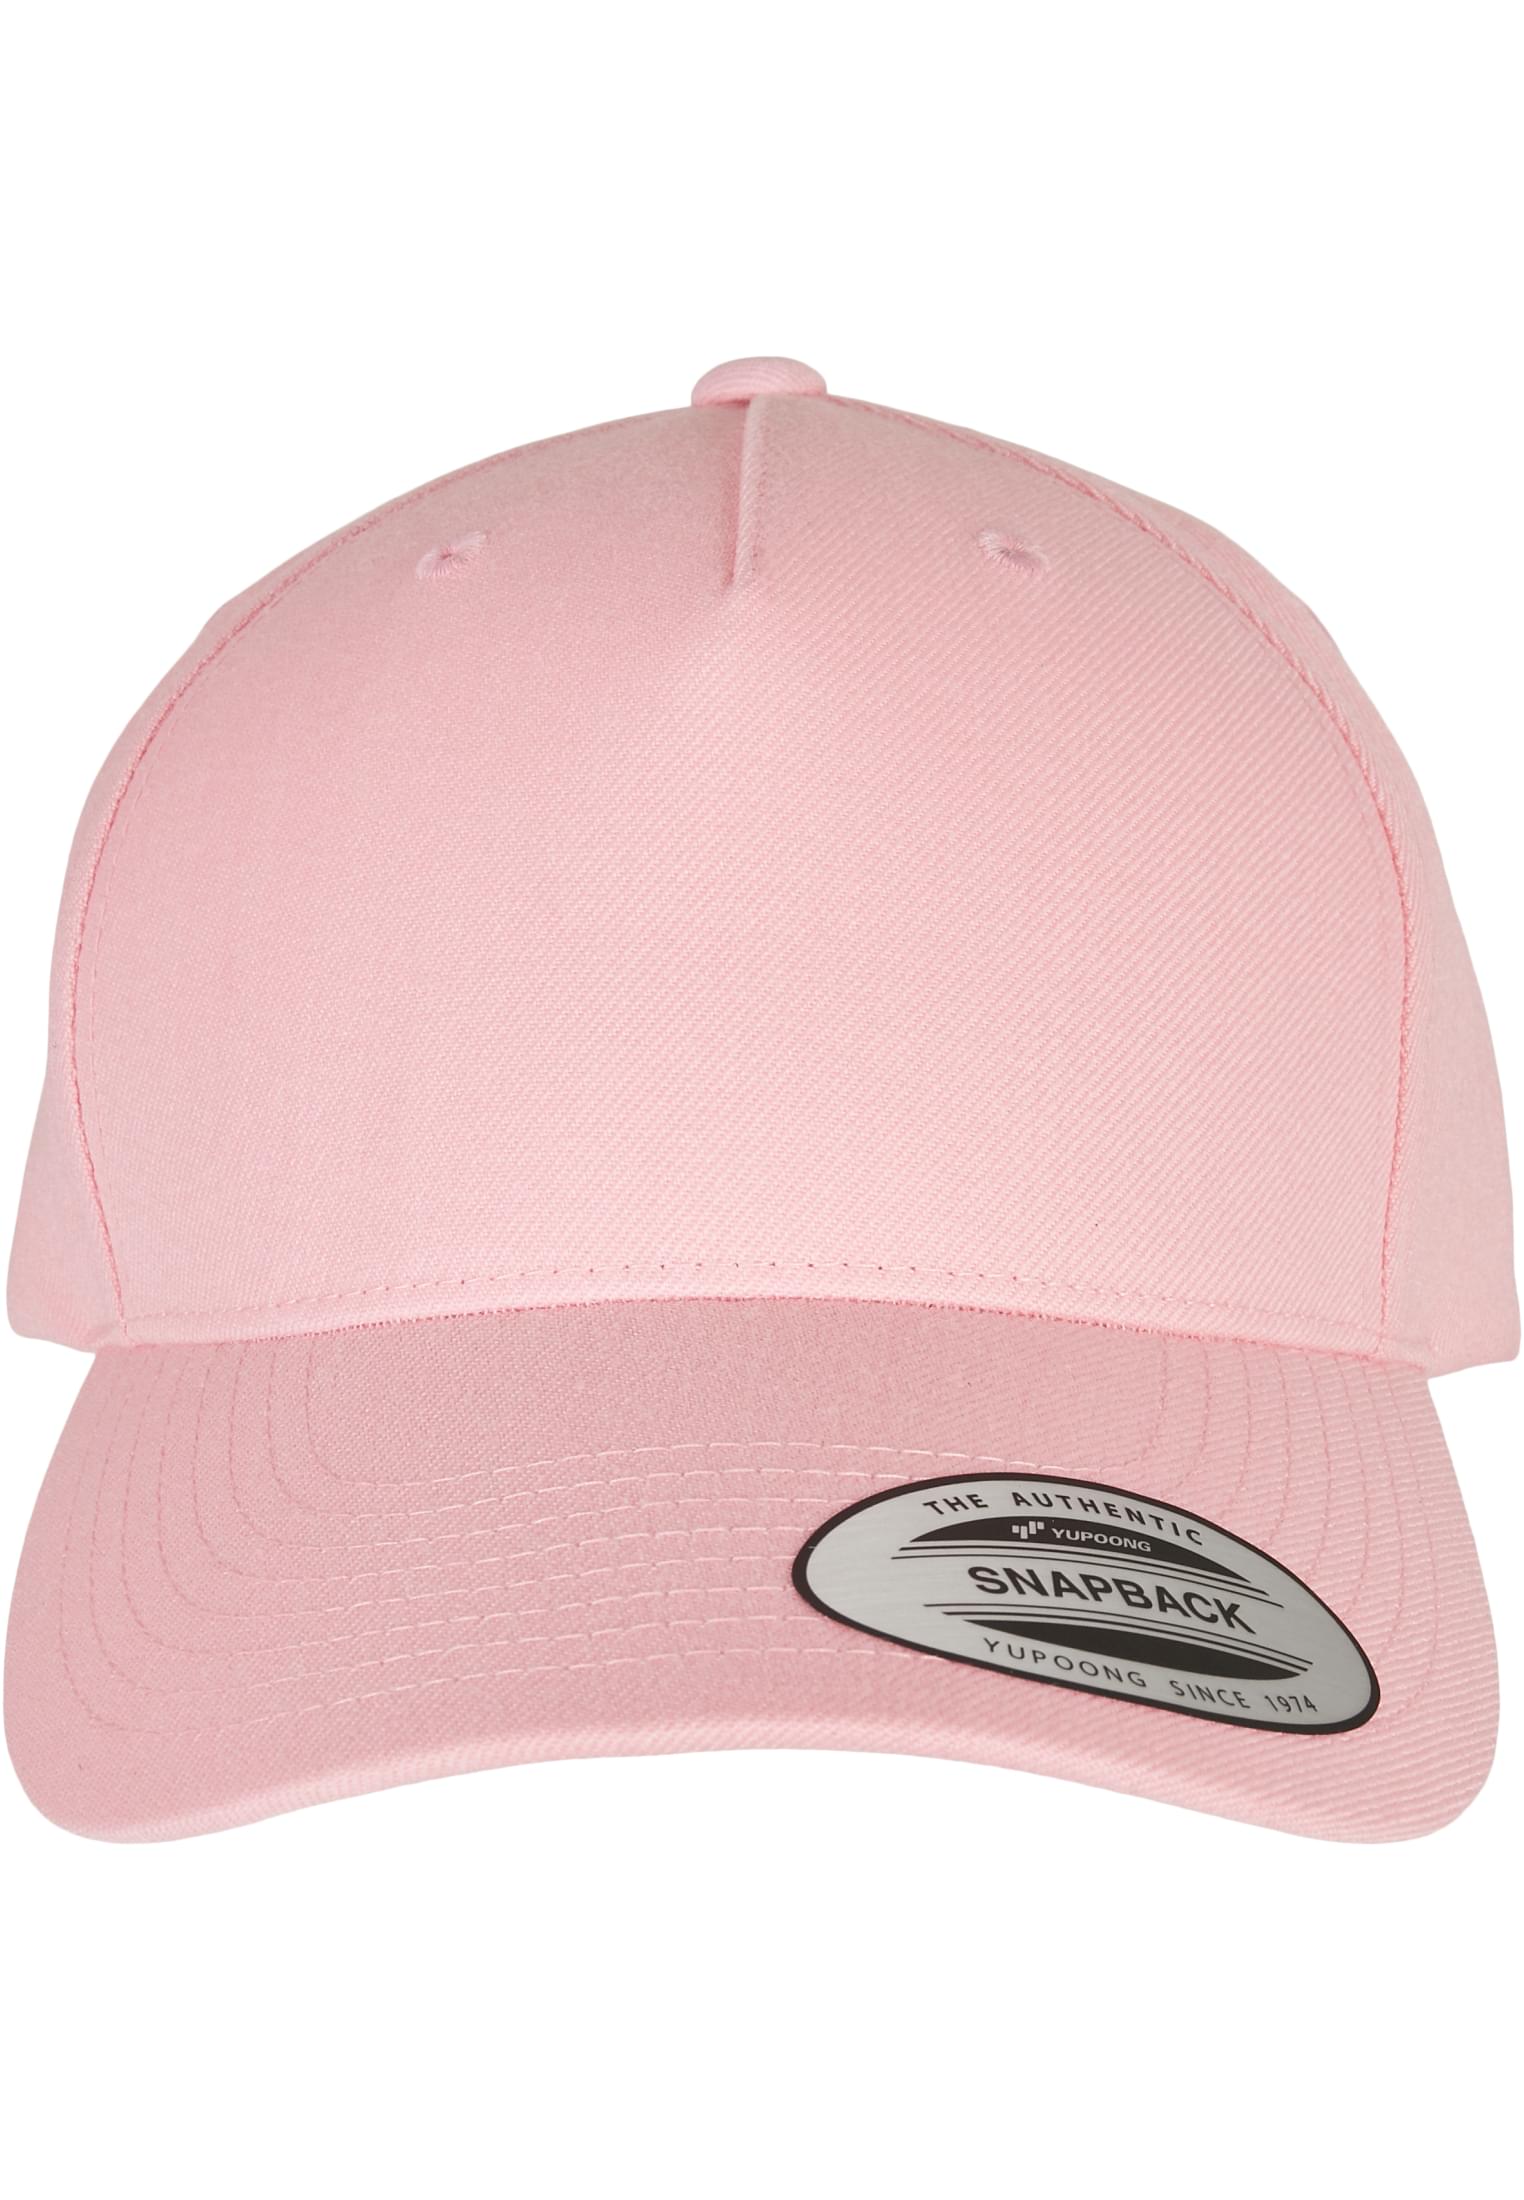 Бейсболка Flexfit Snapback, цвет prism pink 20x20x20mm right angle prism material k9 refraction prism optical glass reflective prism prism glass triangular prism with